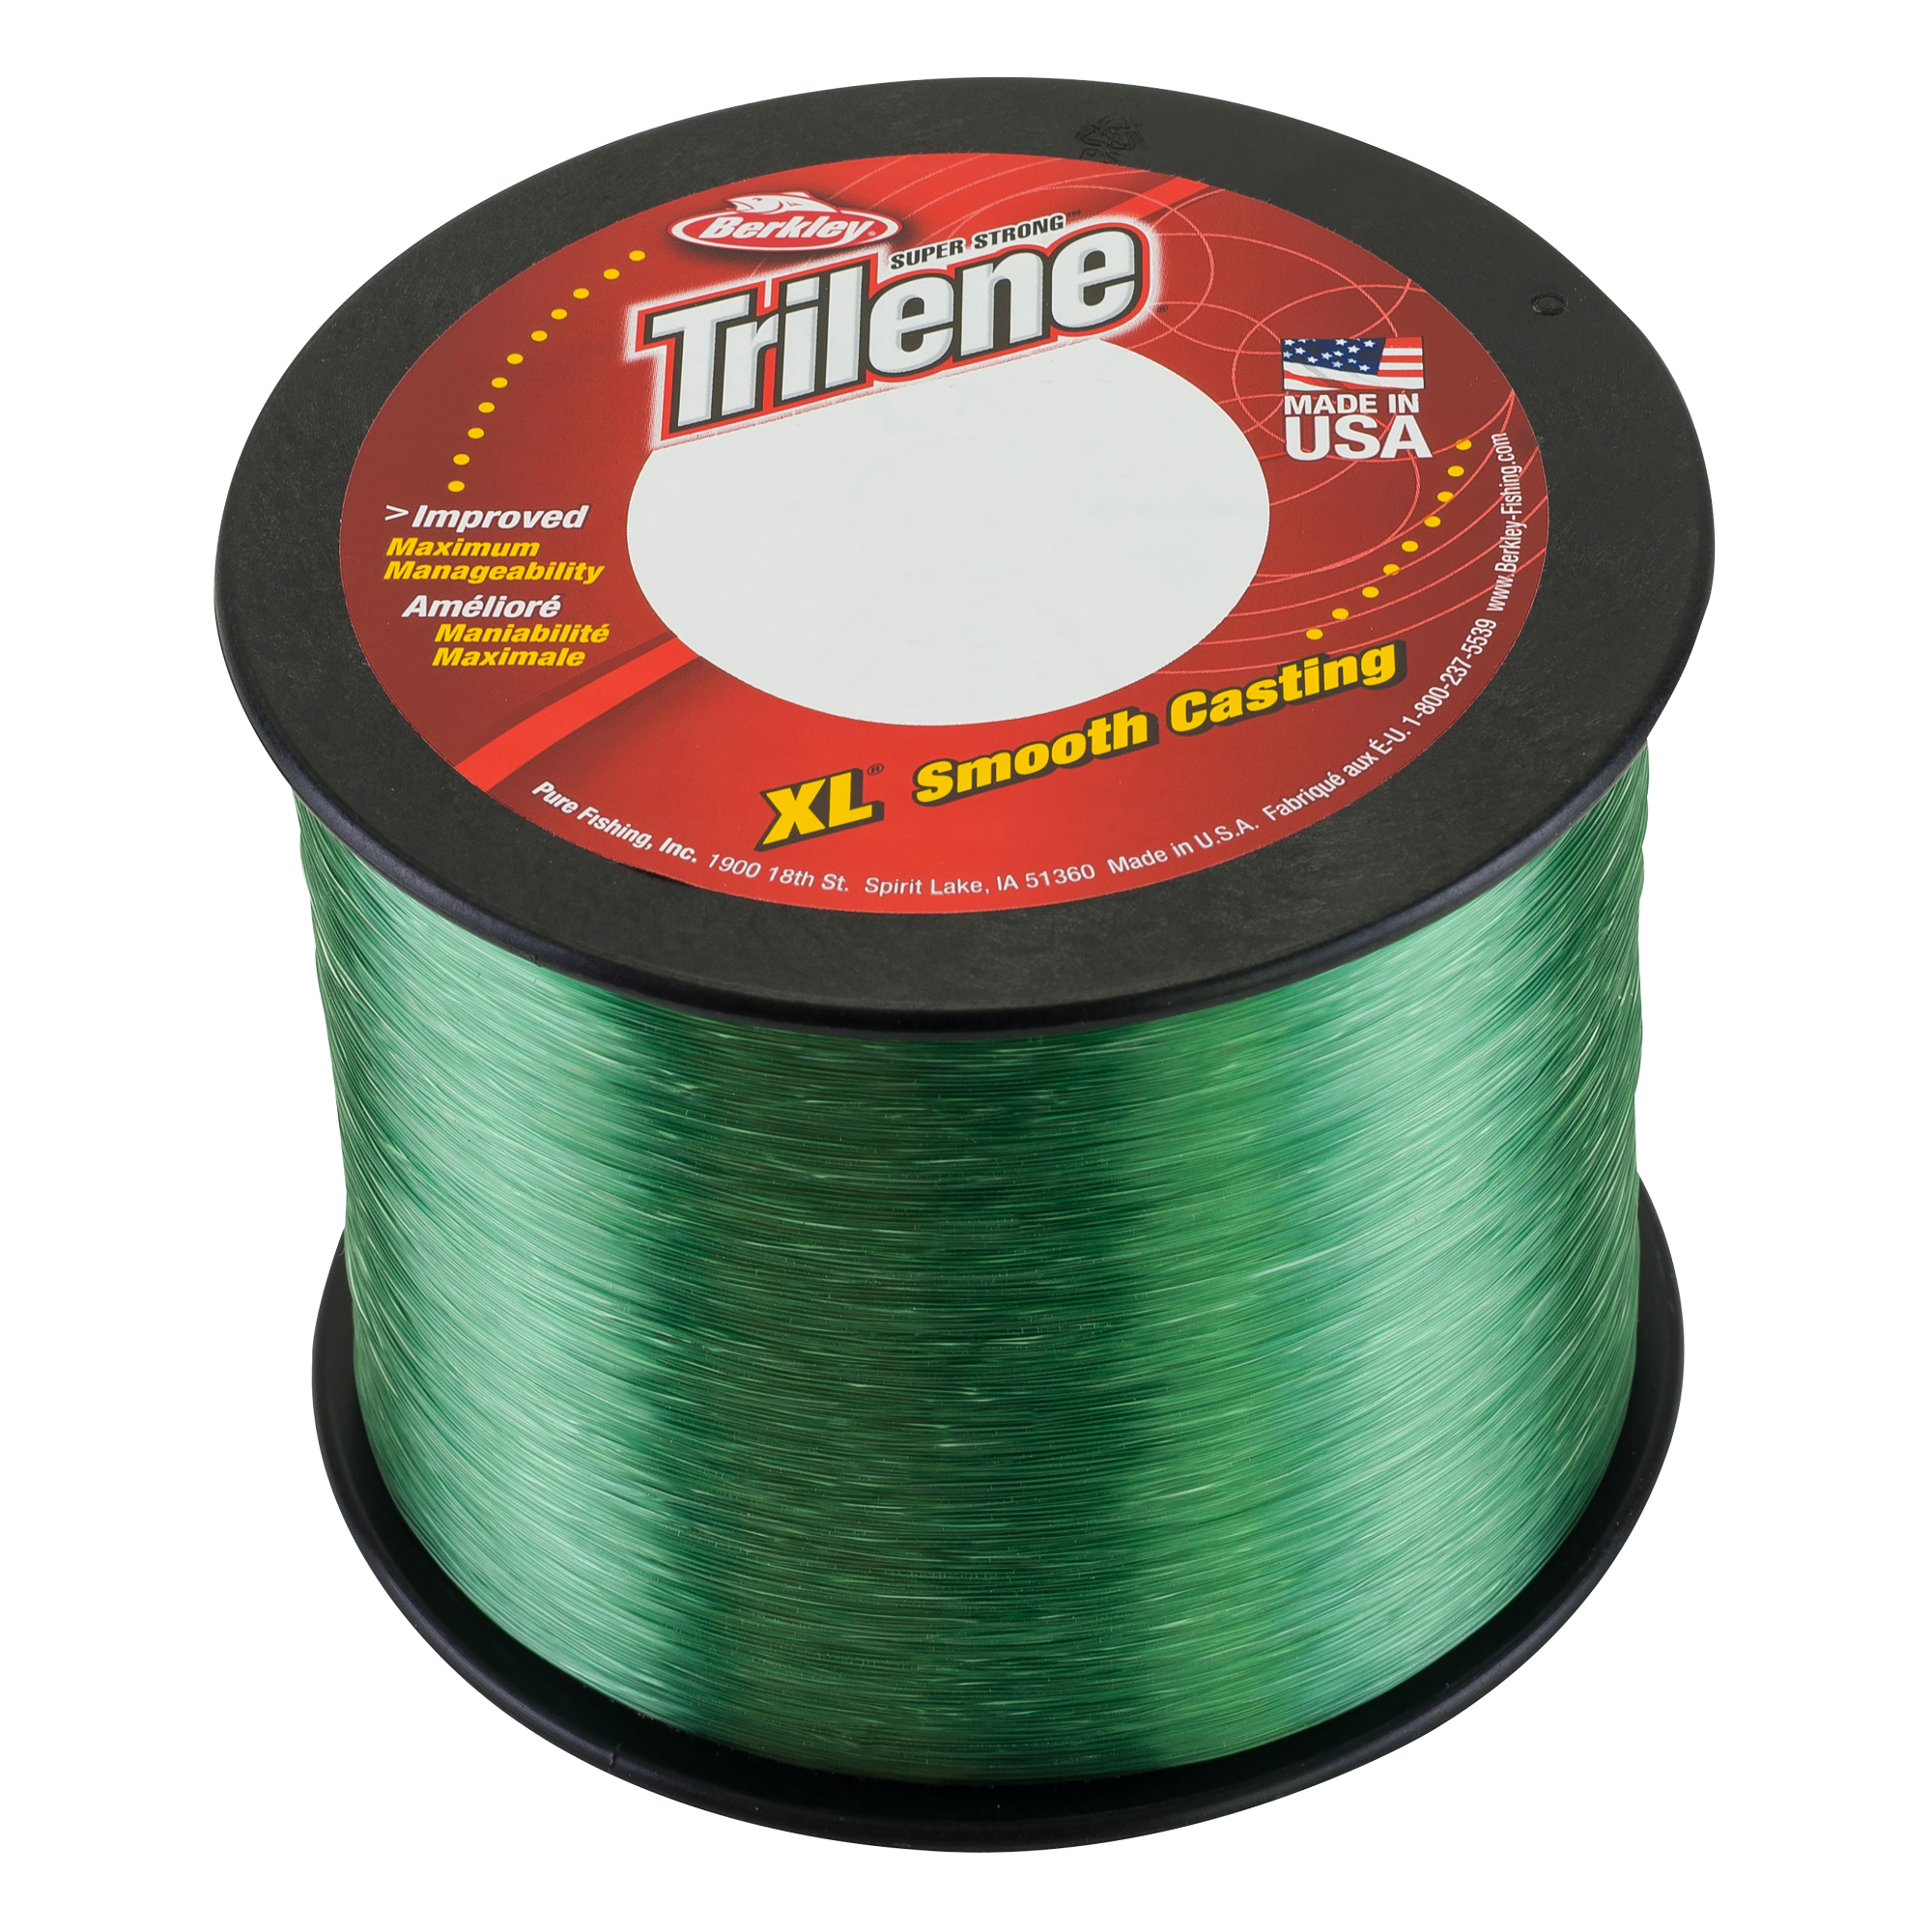 Sufix Elite Low-Vis Green Monofilament Fishing Line 3000 YD Spools CHOOSE  YOUR LINE WEIGHT!